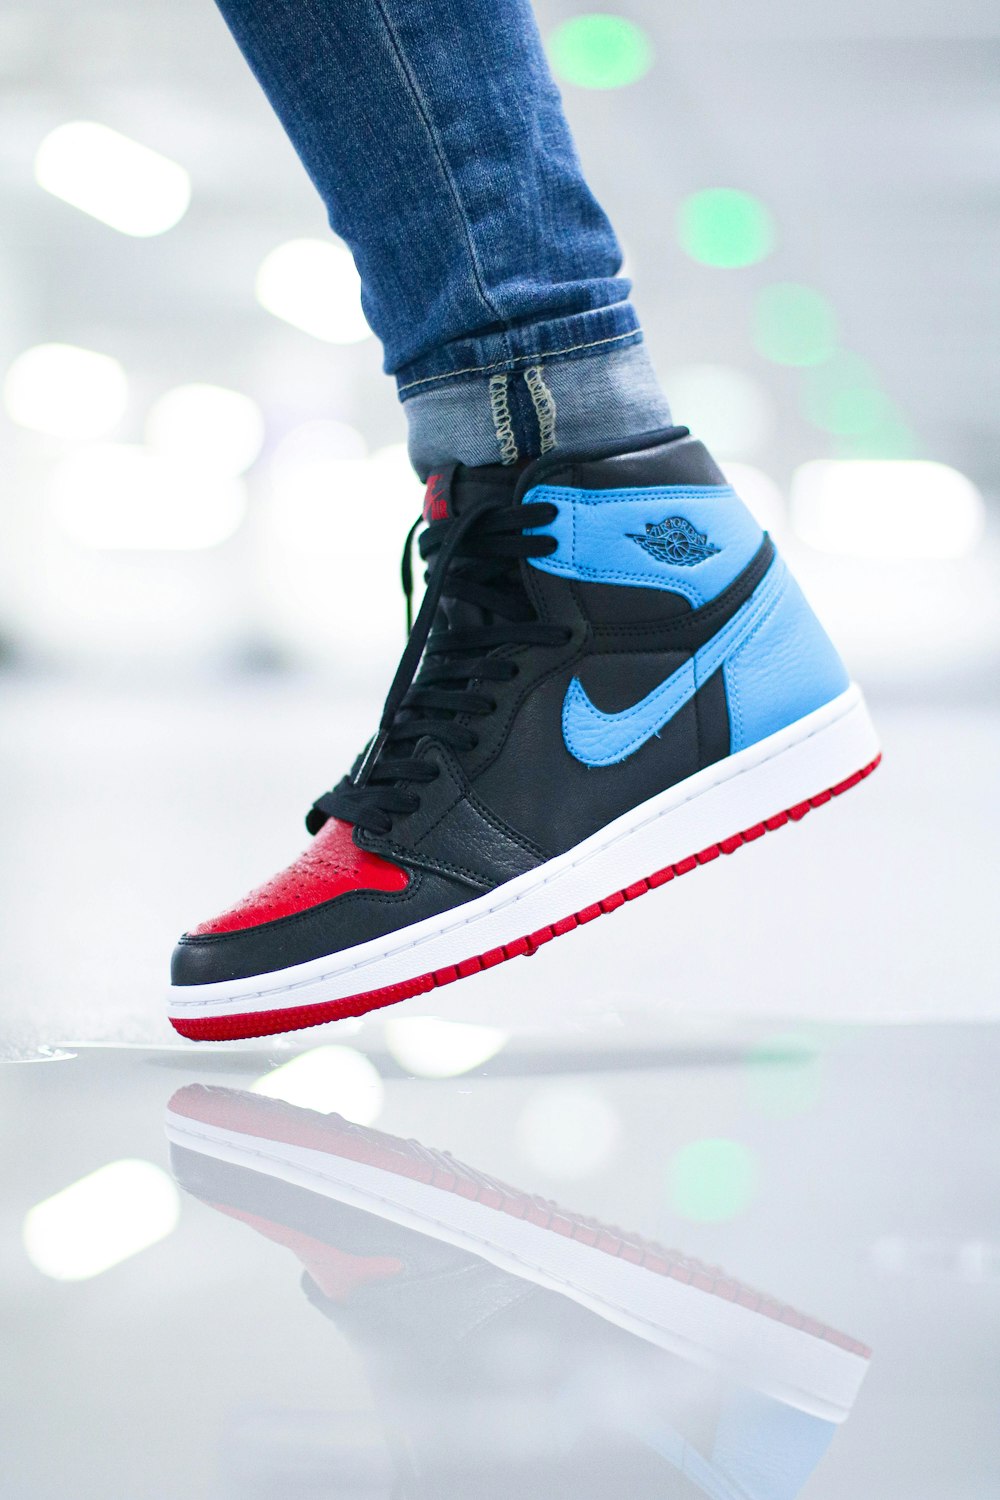 person wearing black blue and white nike air jordan 1 shoes